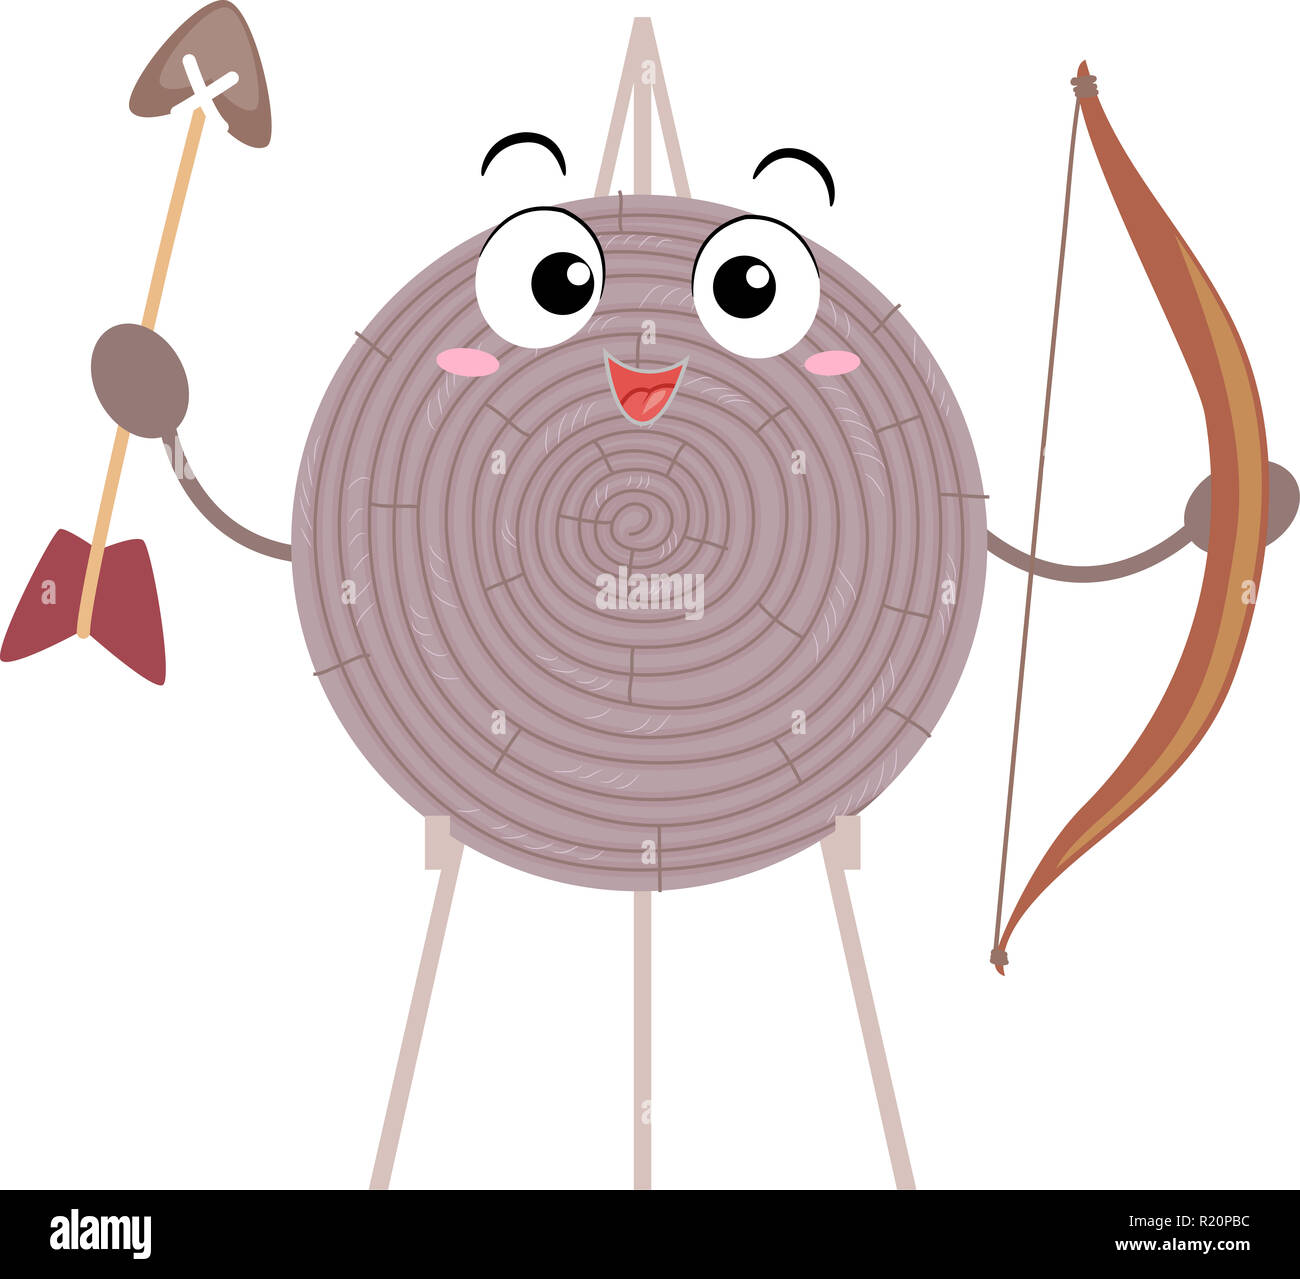 Colorful Mascot Illustration Featuring an Archery Target Holding a Bow and Arrow Stock Photo